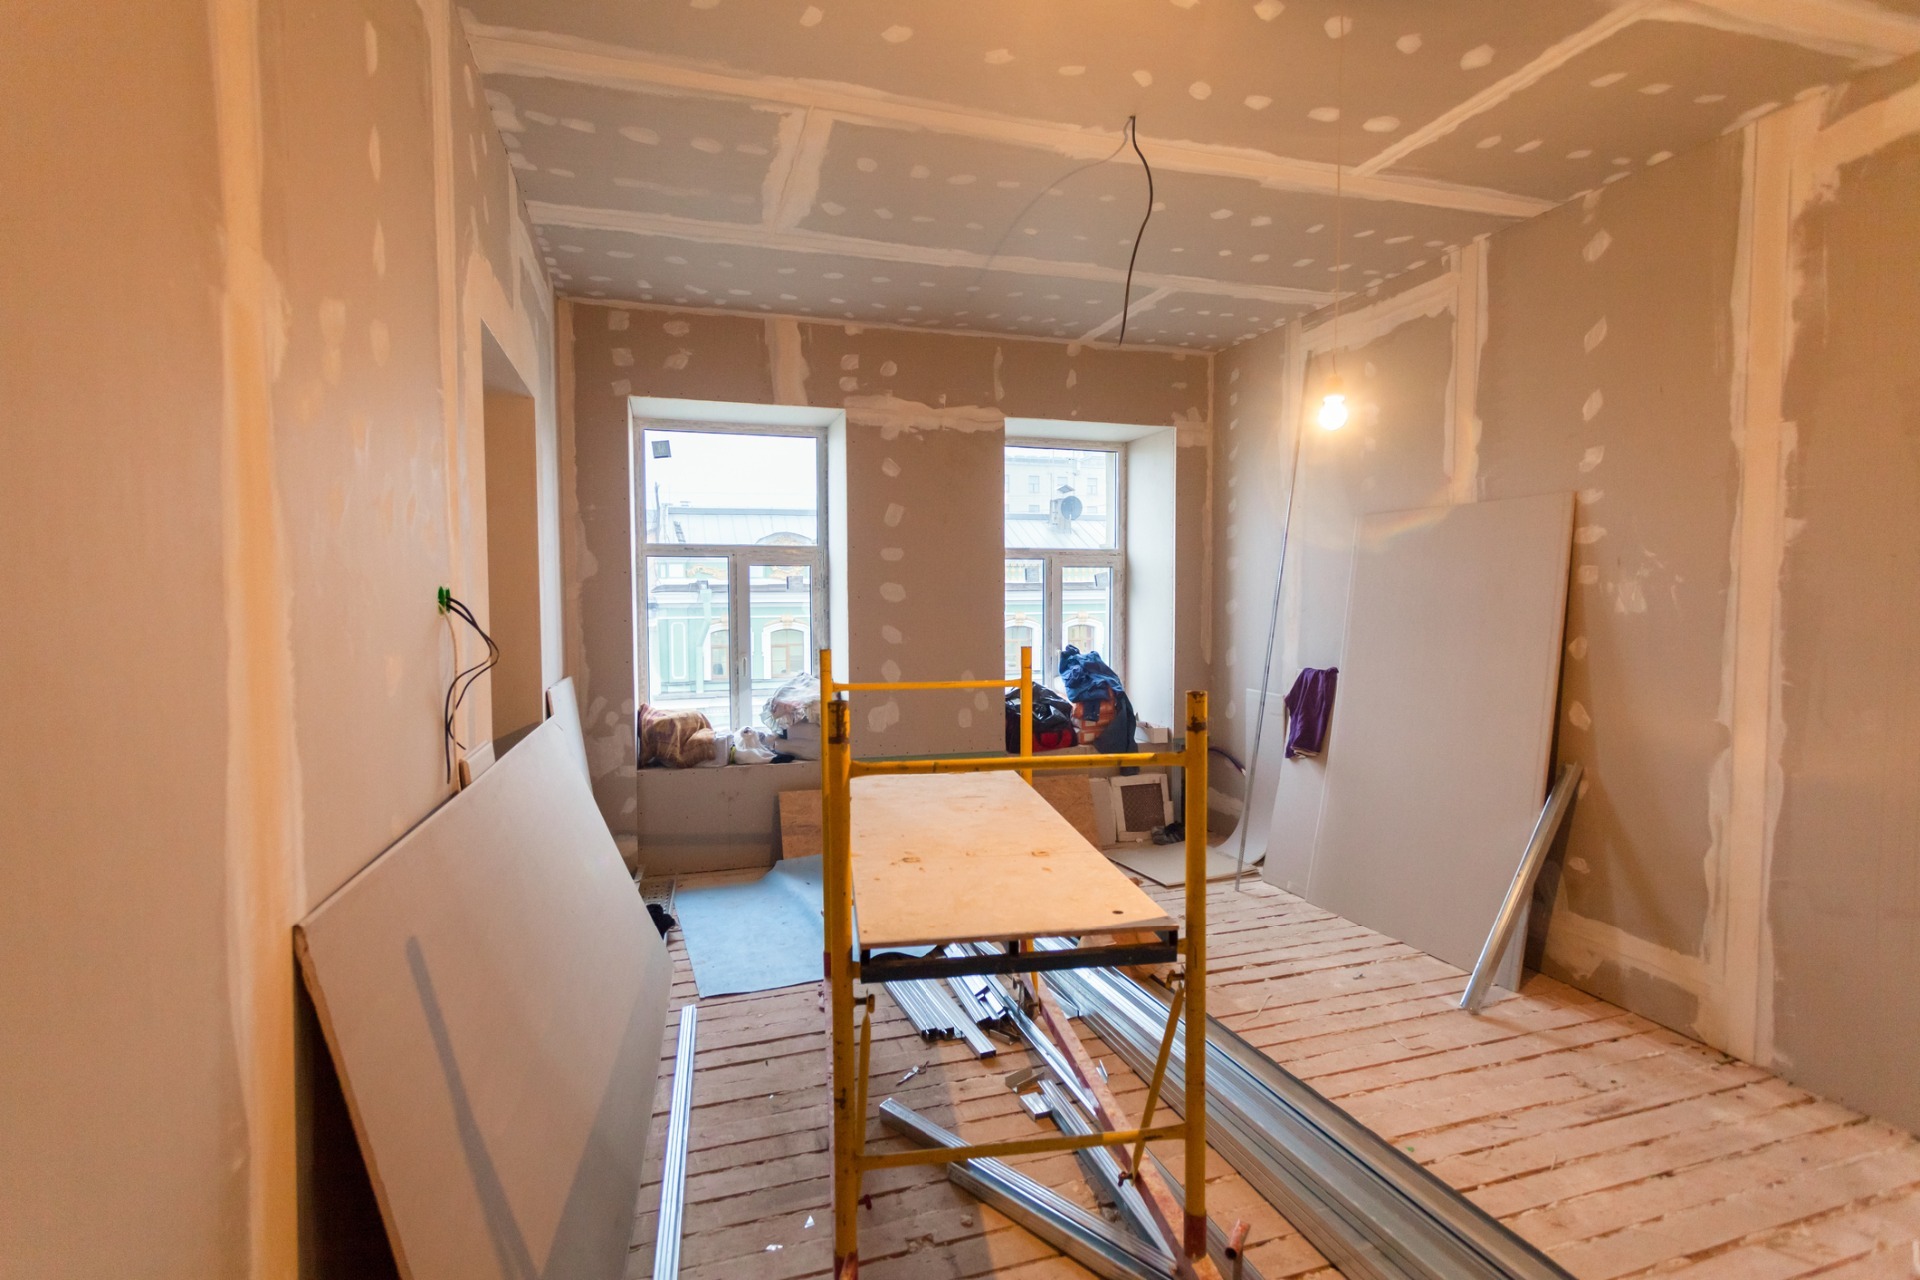 A room being renovated in Barnstaple North Devon.